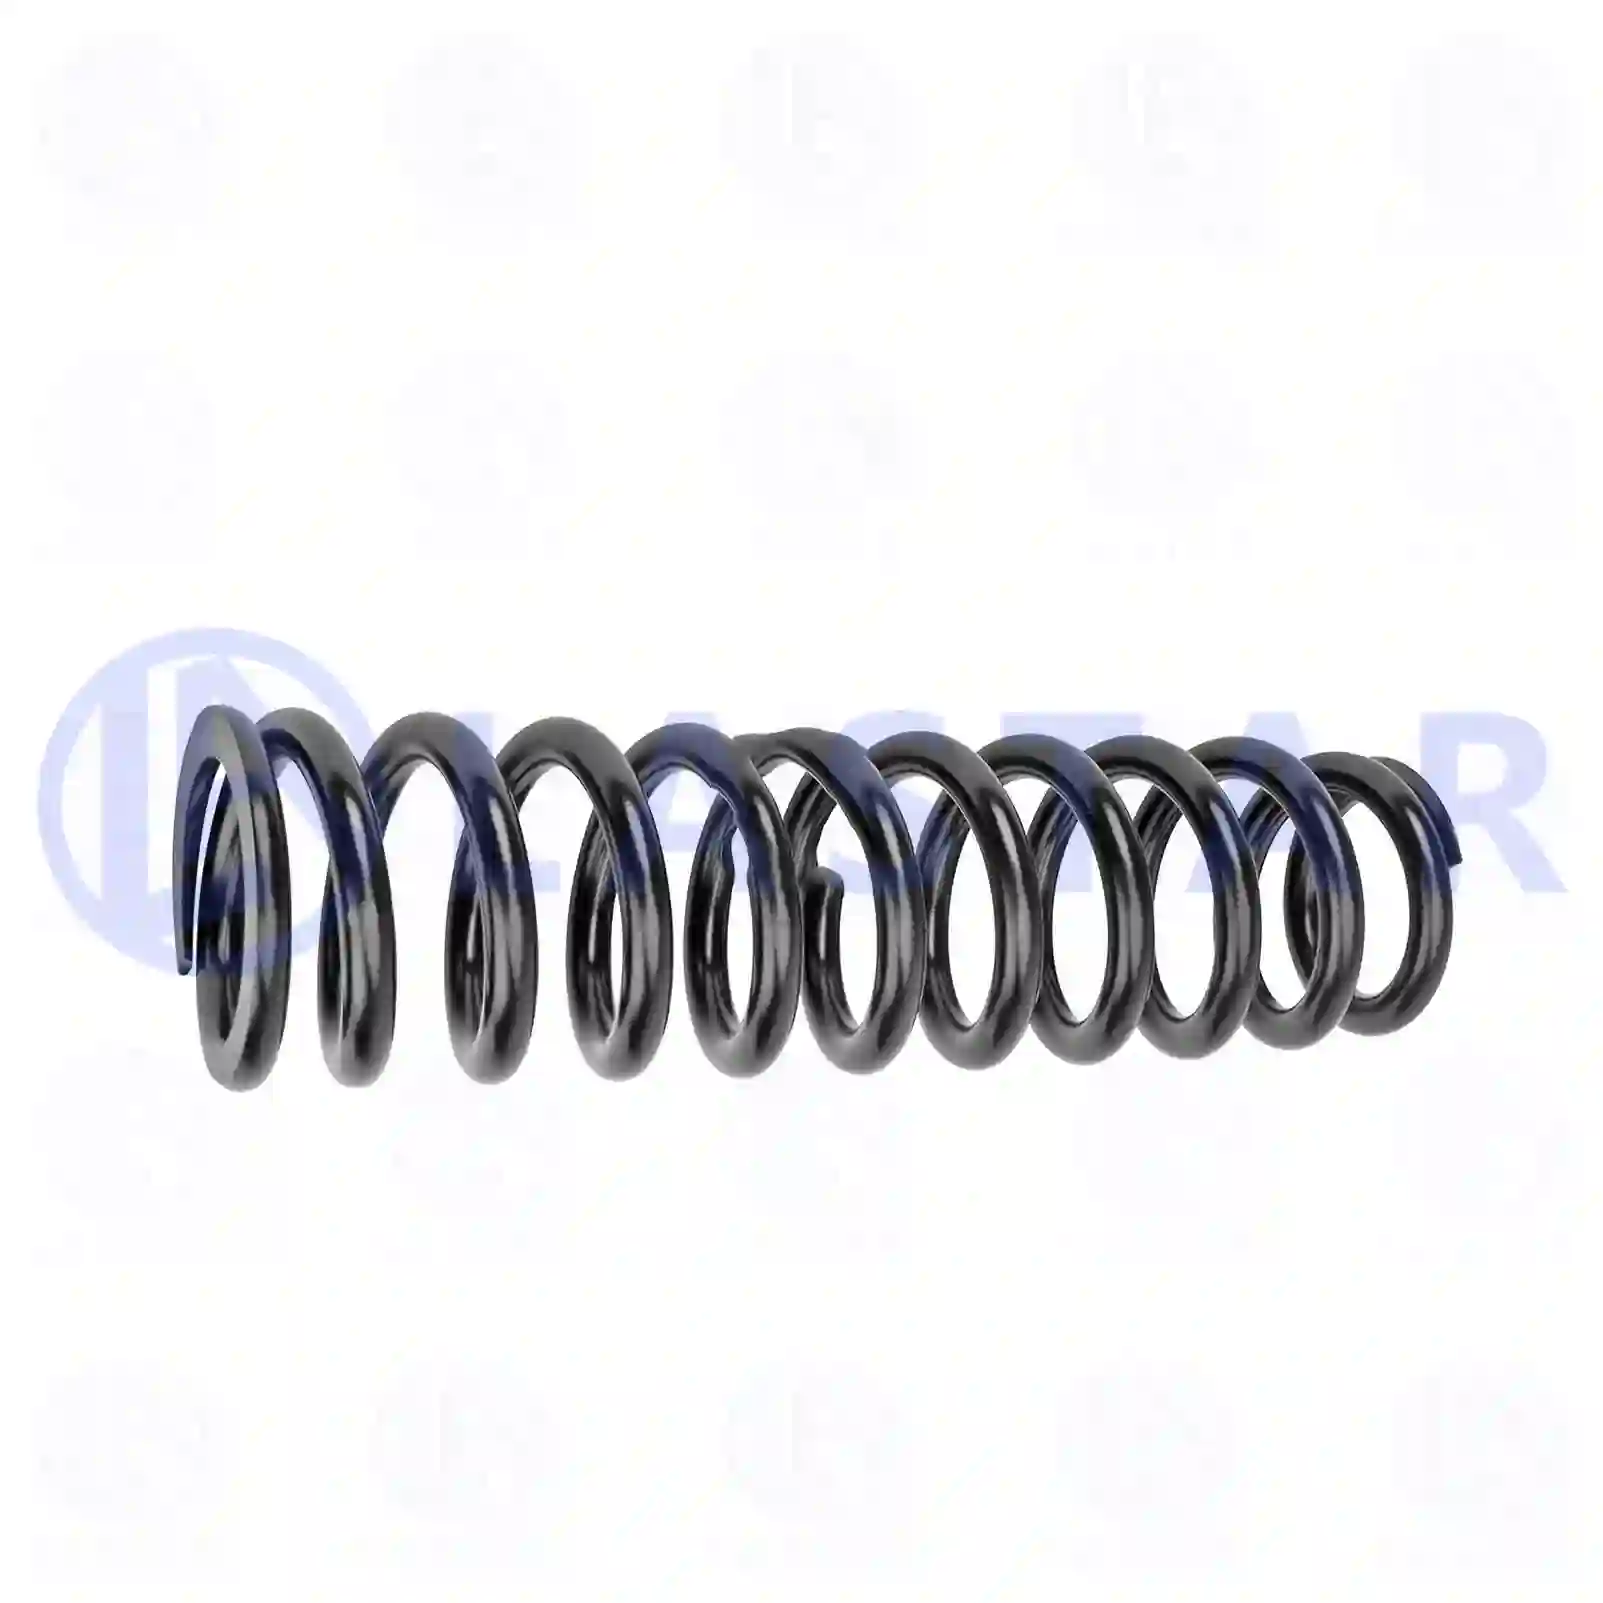 Spring, cabin shock absorber, 77736037, 1466177, 1466179, , , , ||  77736037 Lastar Spare Part | Truck Spare Parts, Auotomotive Spare Parts Spring, cabin shock absorber, 77736037, 1466177, 1466179, , , , ||  77736037 Lastar Spare Part | Truck Spare Parts, Auotomotive Spare Parts